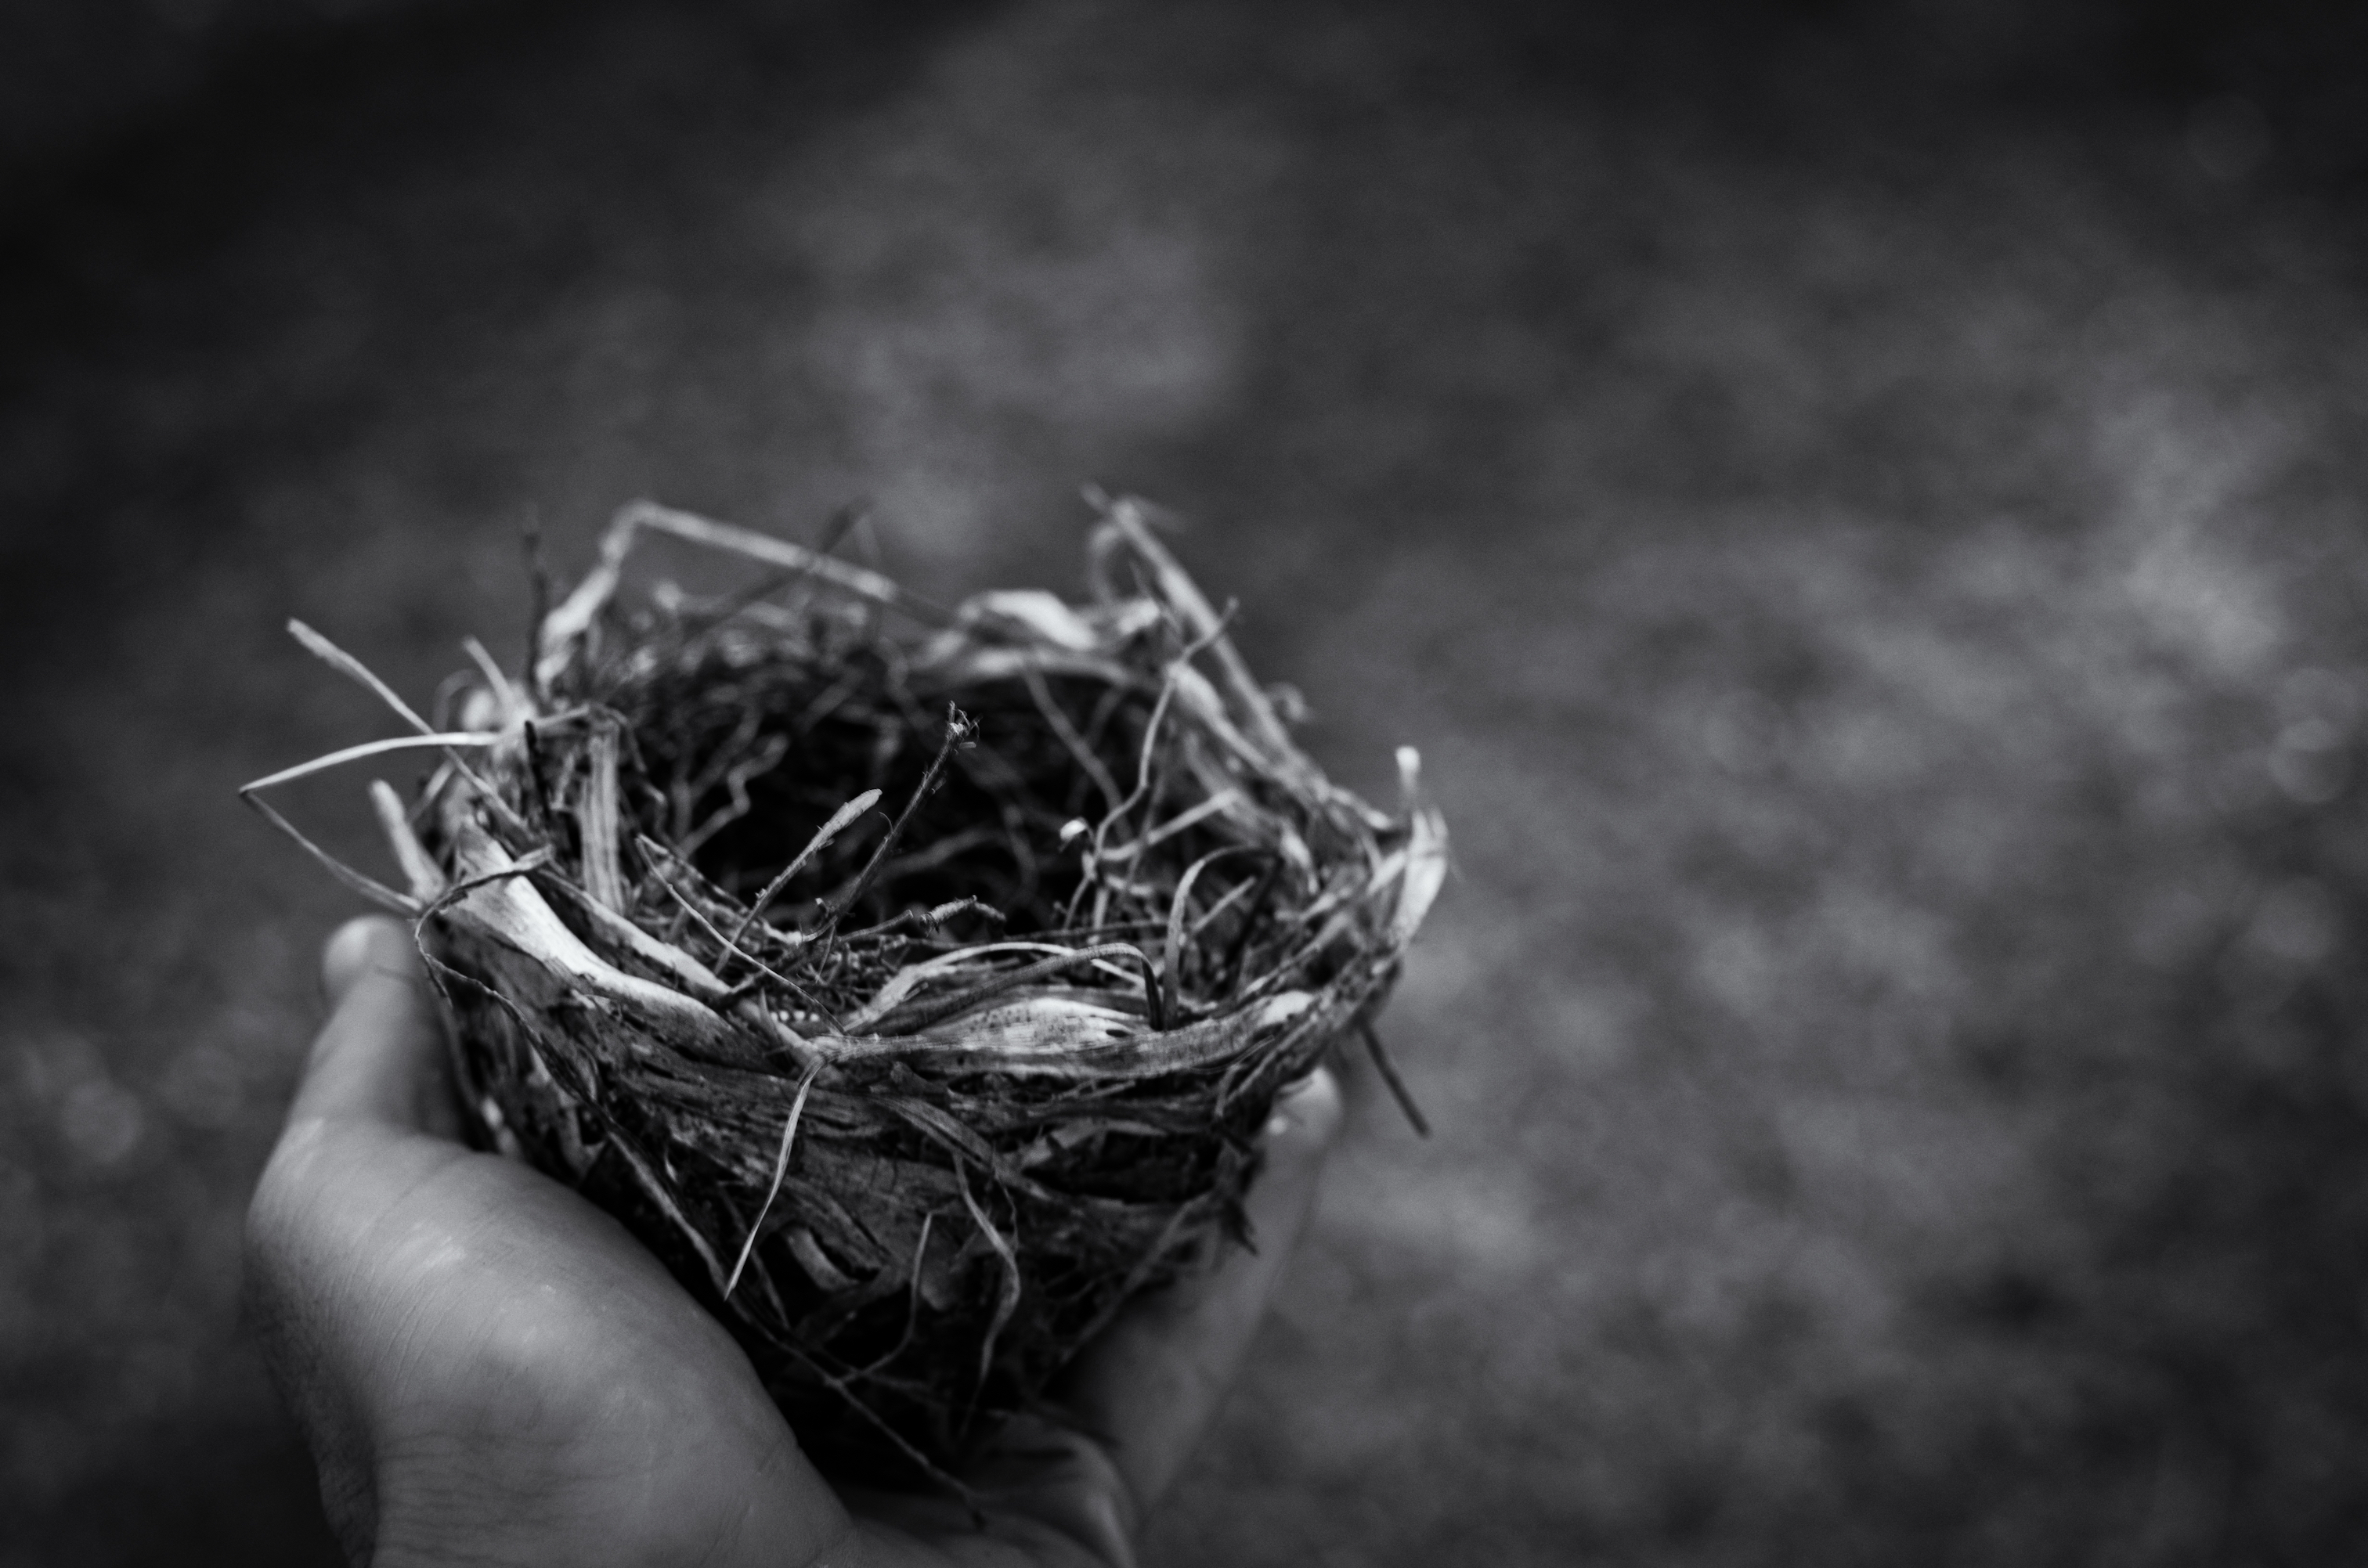 A small bird's nest is held in a human hand (black and white photo)